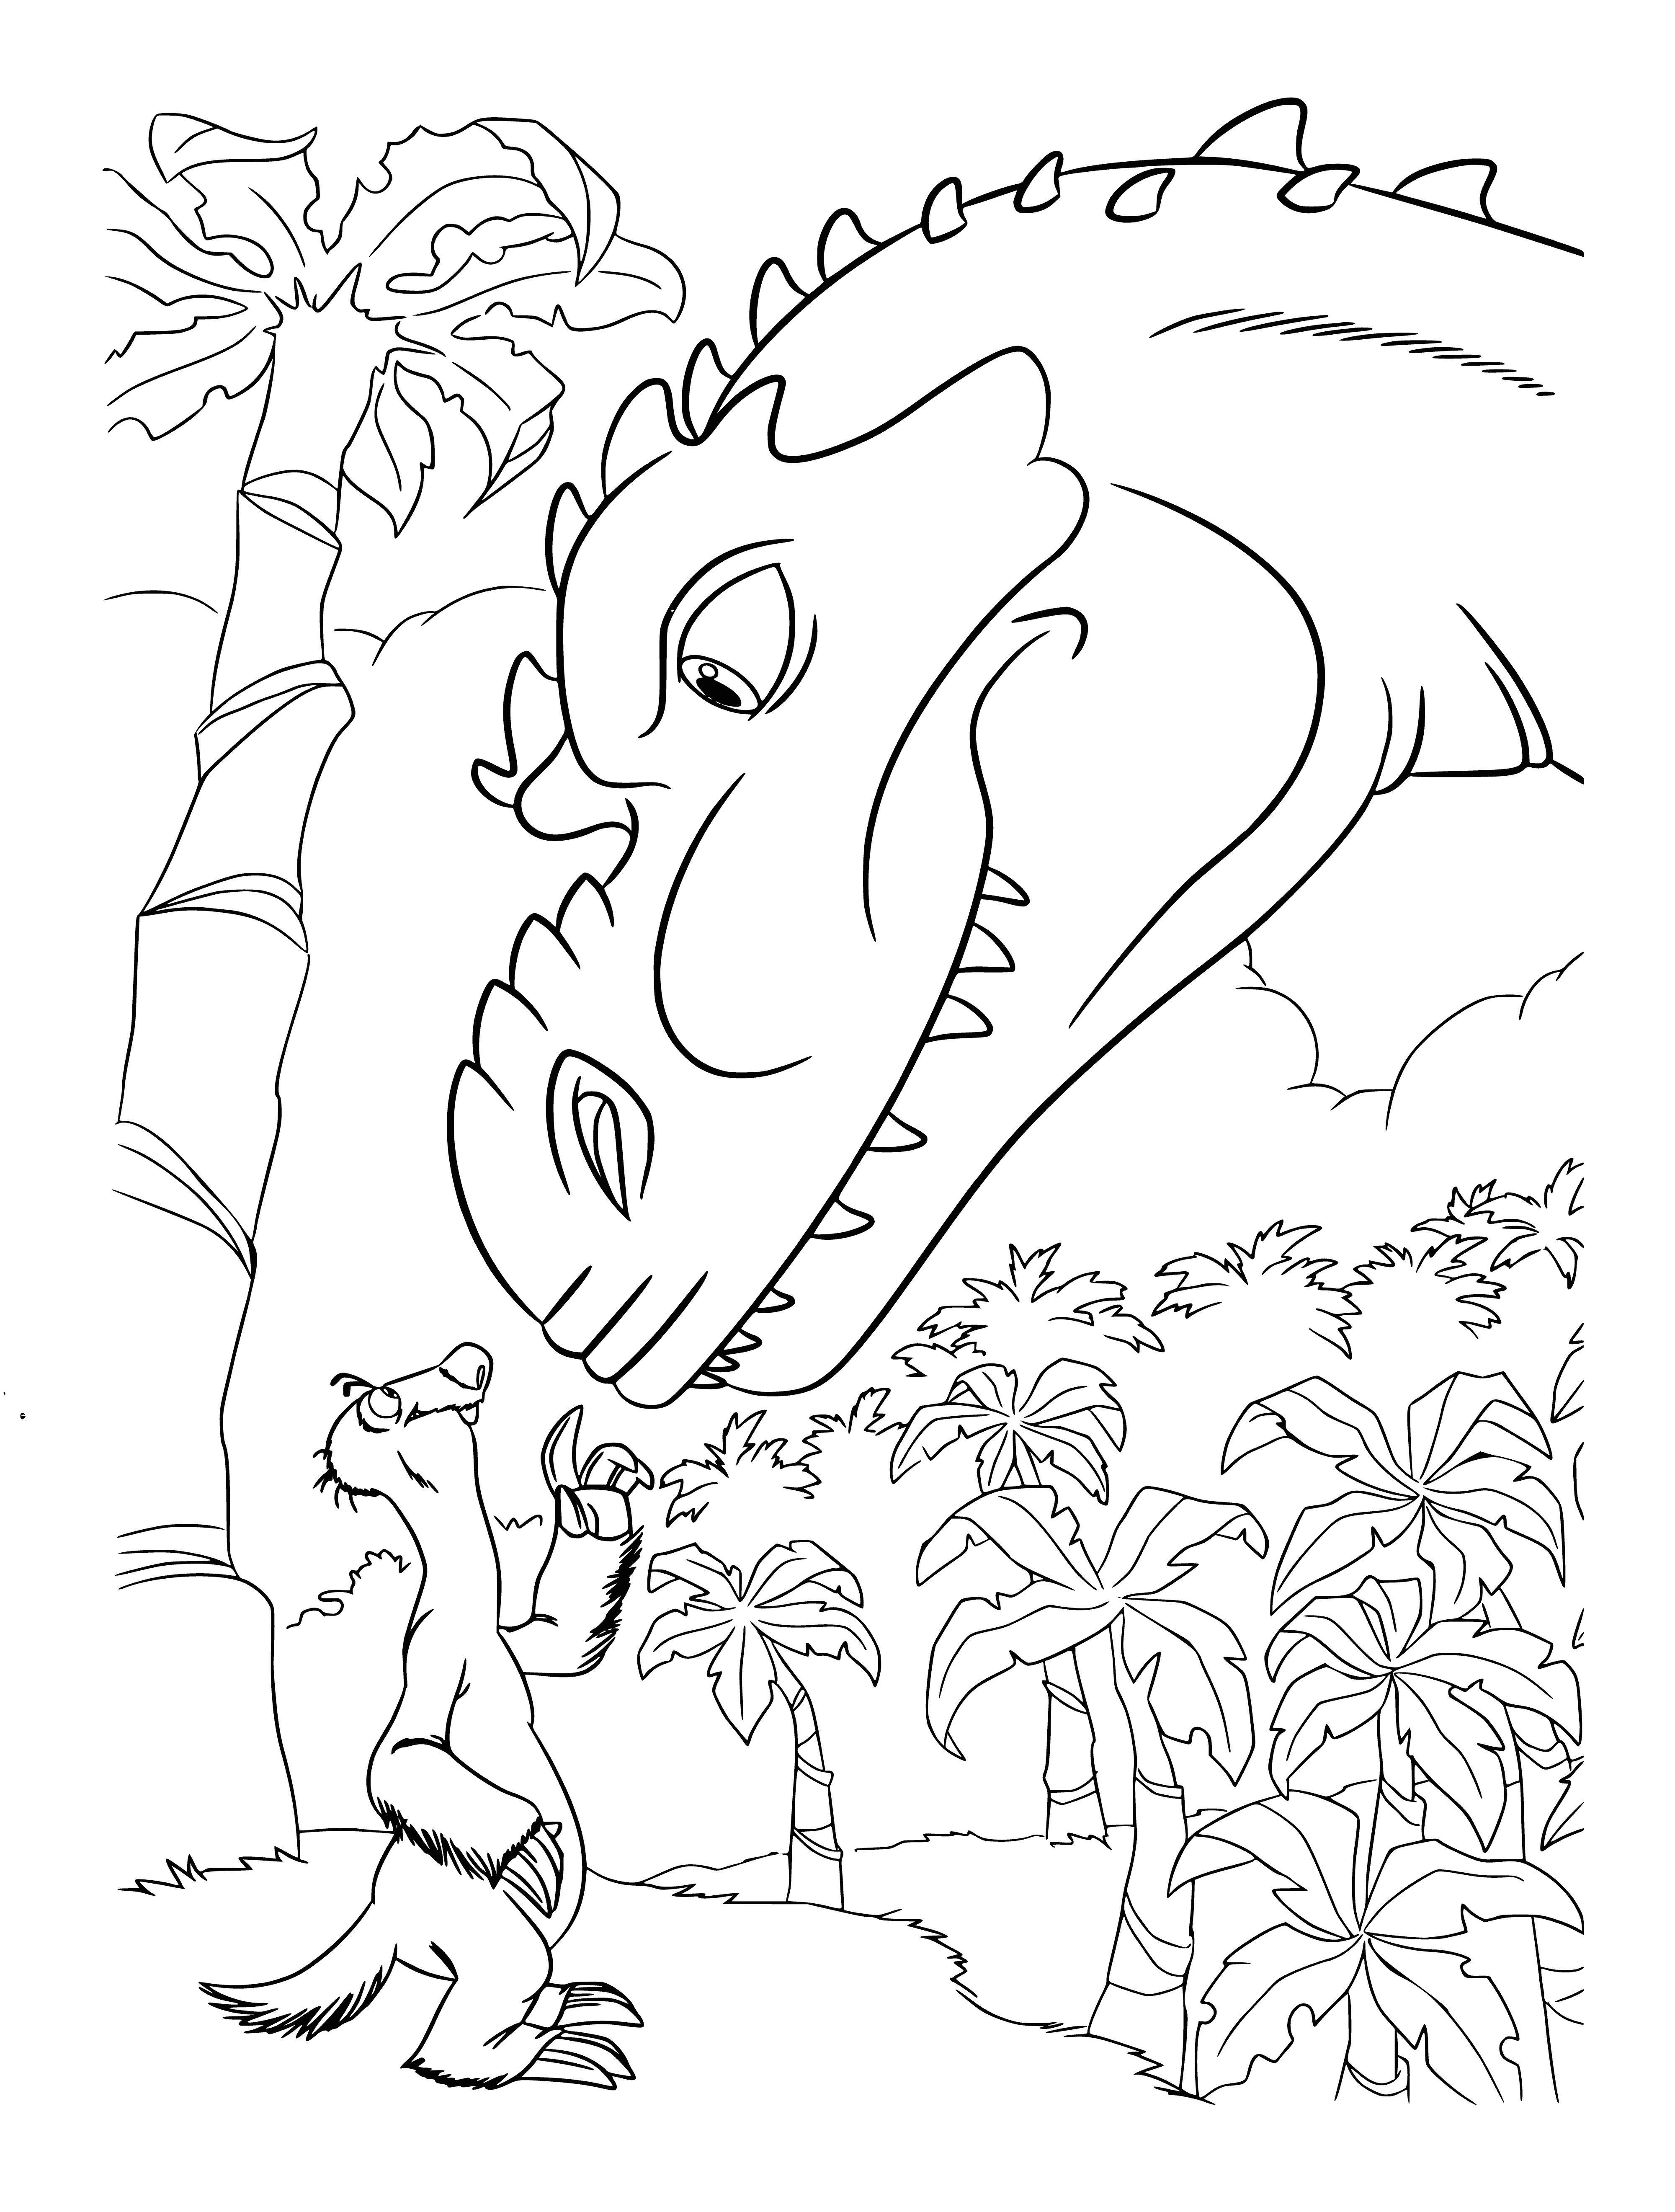 Sid and the dinosaur coloring page